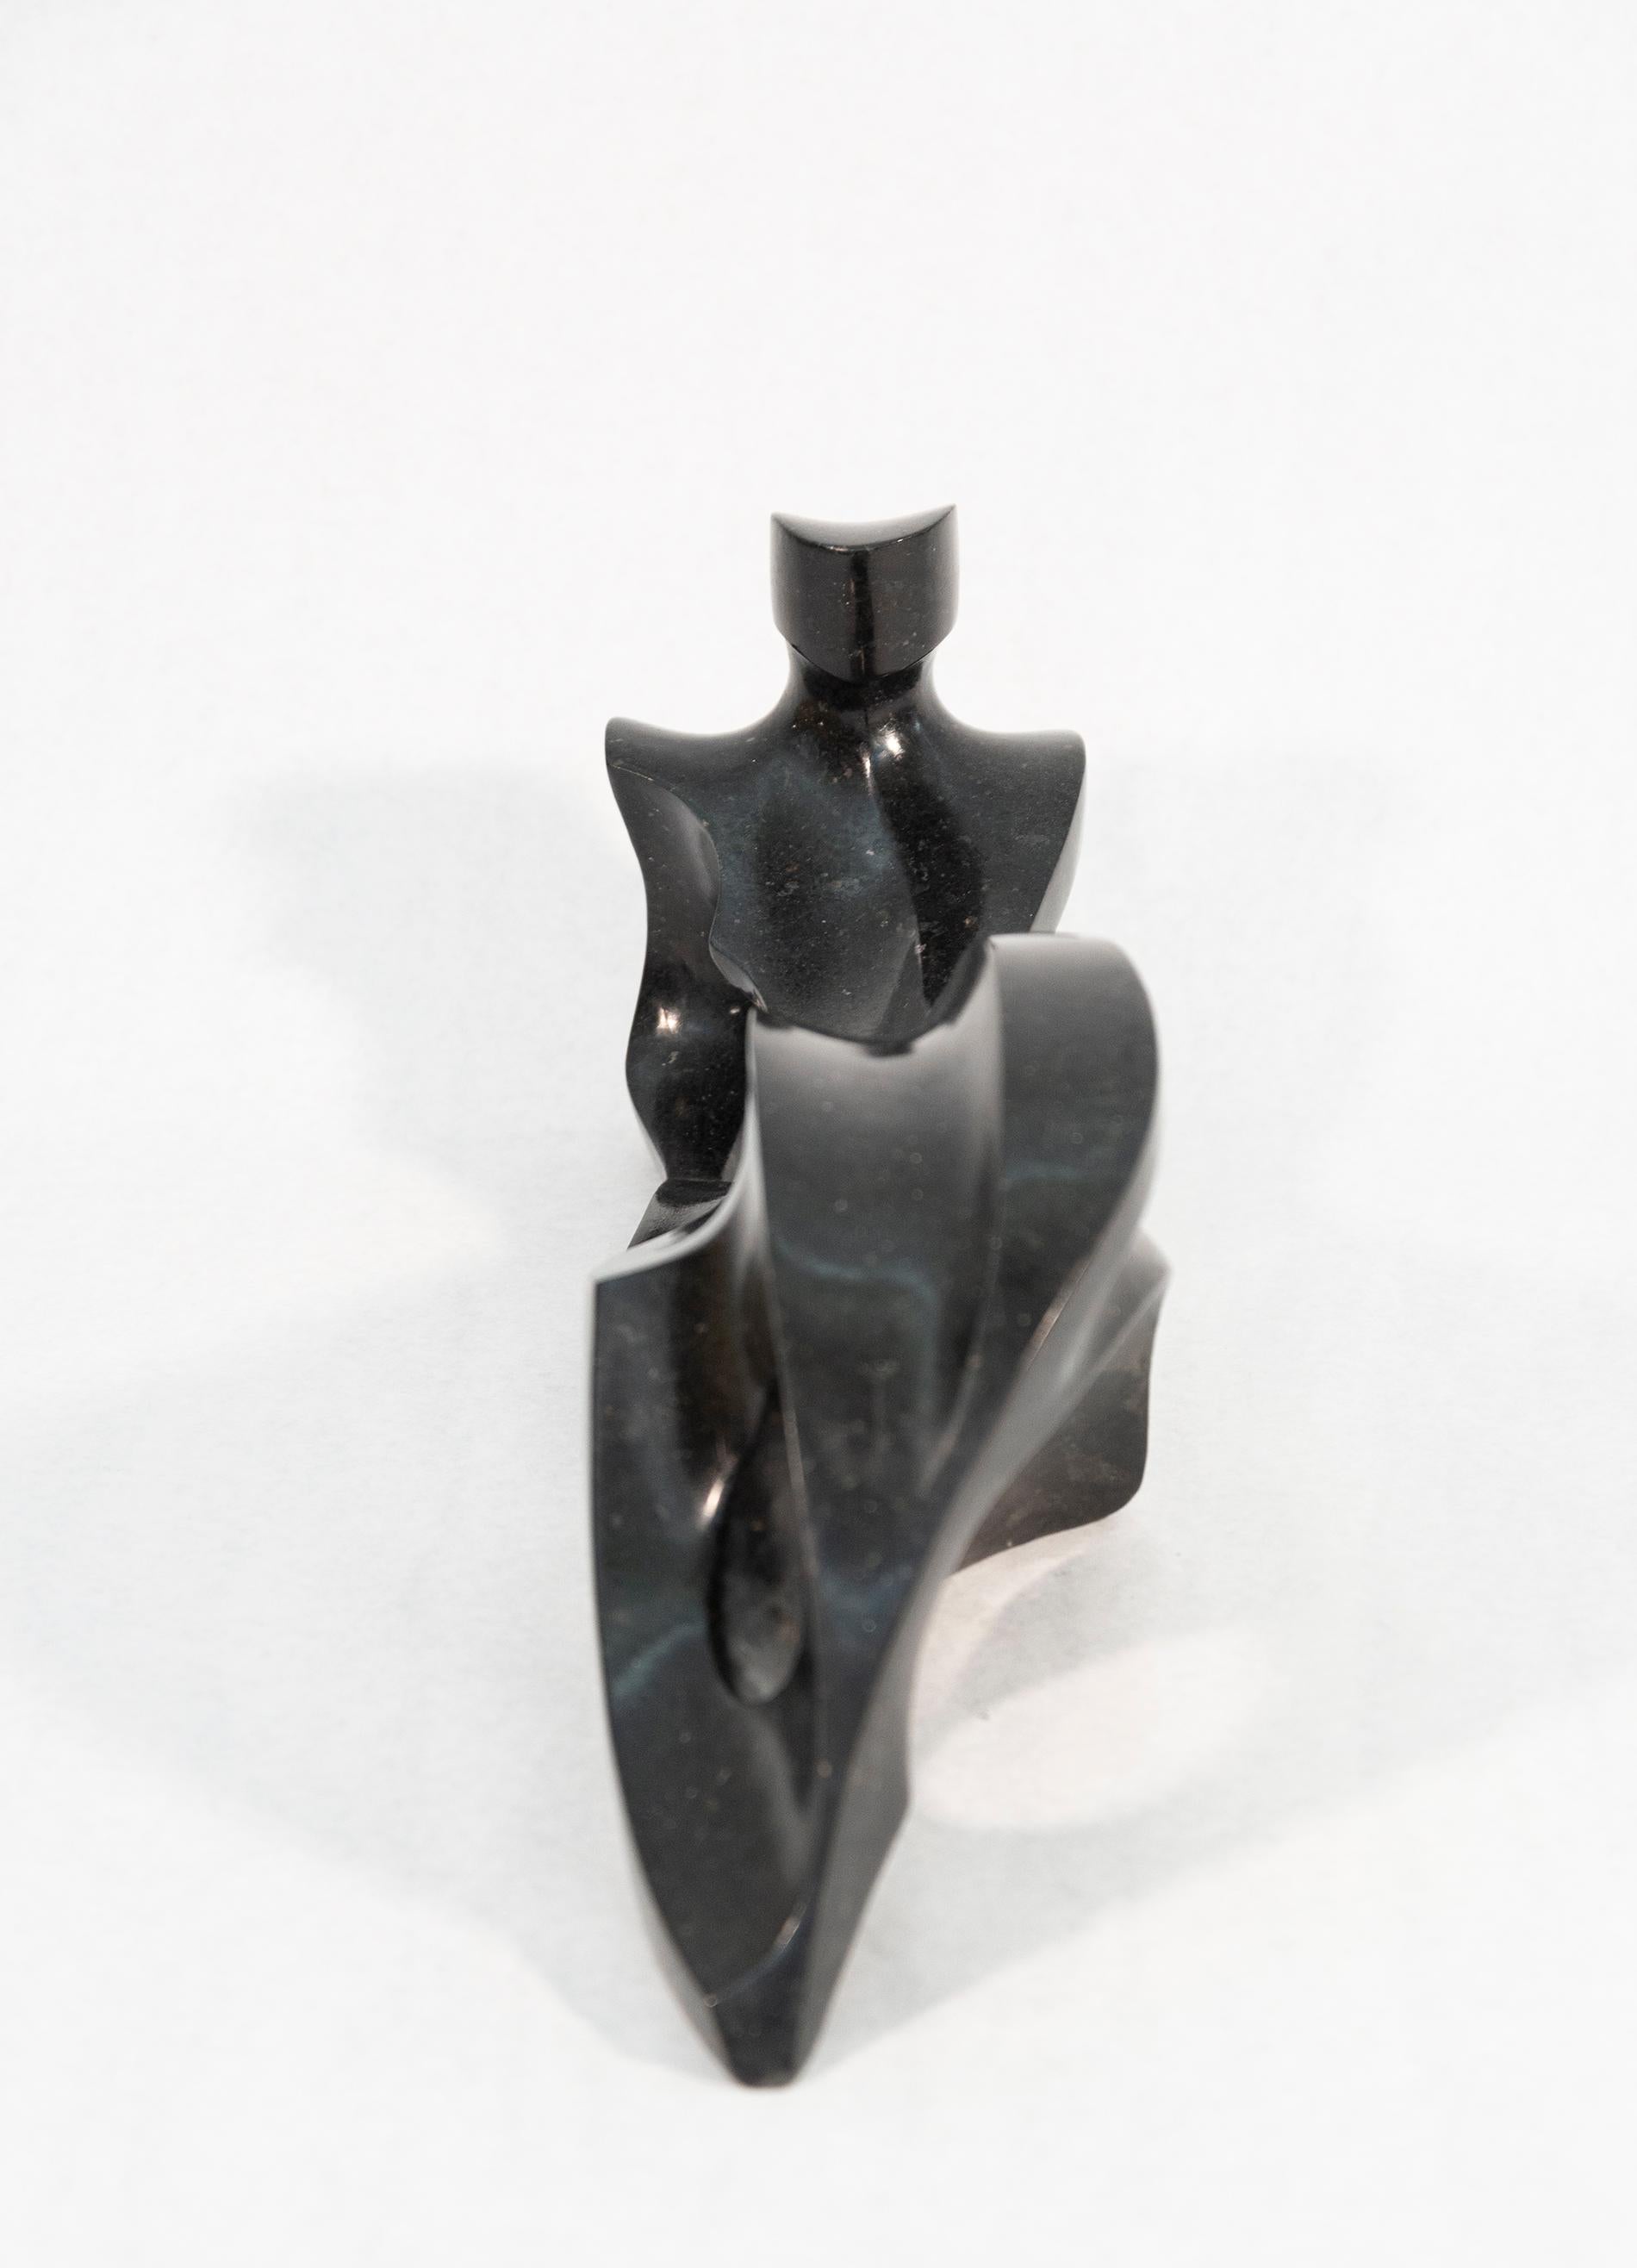 At once elegant and contemporary—this sublime sculpture of a reclining figure is by Jeremy Guy. Chiselled from black granite and honed to a smooth, velvet-like finish, the subject matter is classic. Guy’s influences—the remarkable work of famed